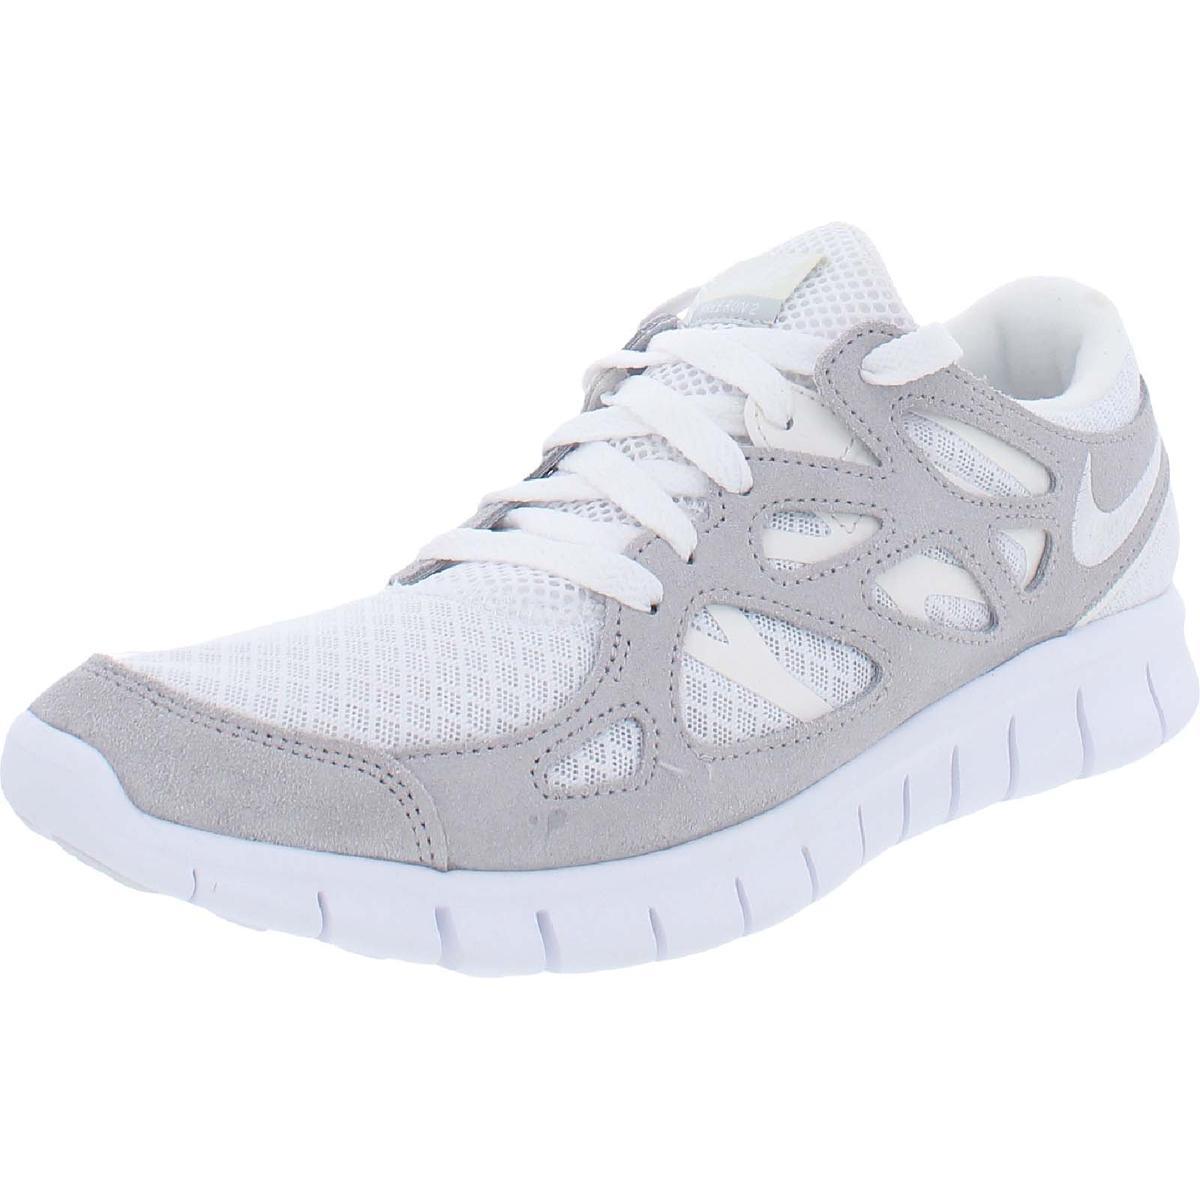 Nike Womens Suede Fitness Trainers Running Shoes Sneakers Bhfo 9239 White/Grey